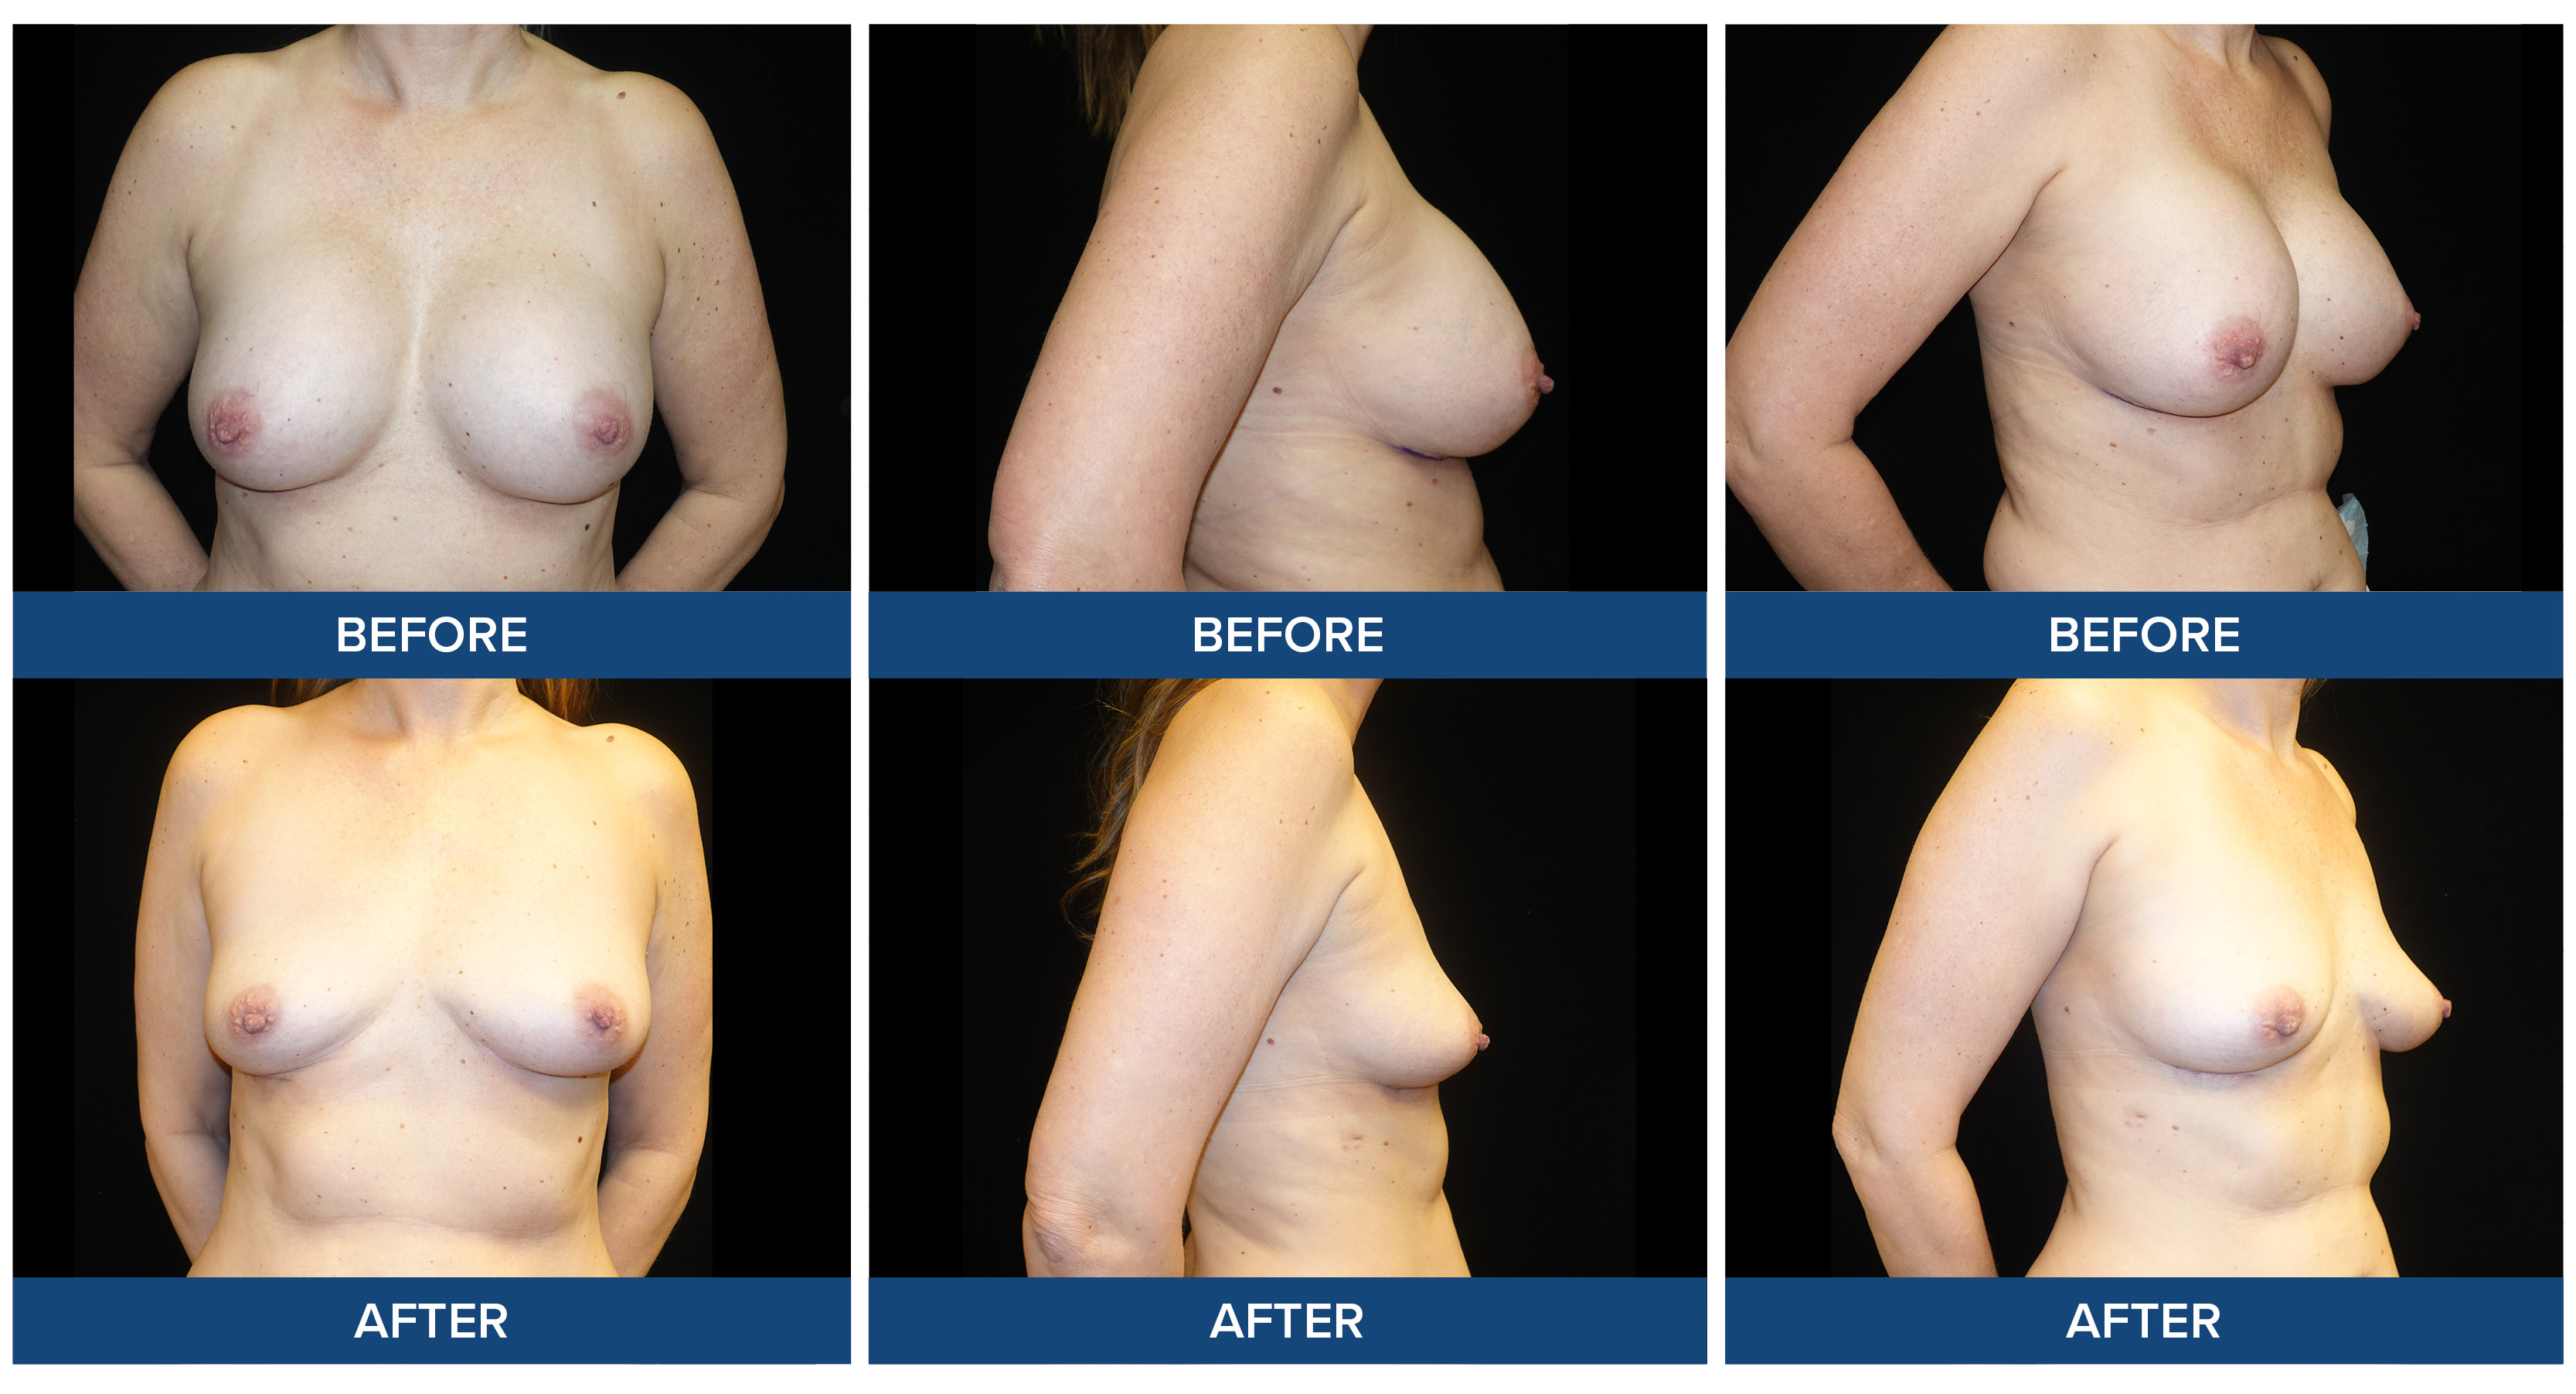 Female patient before and after photos of breast explant procedure.